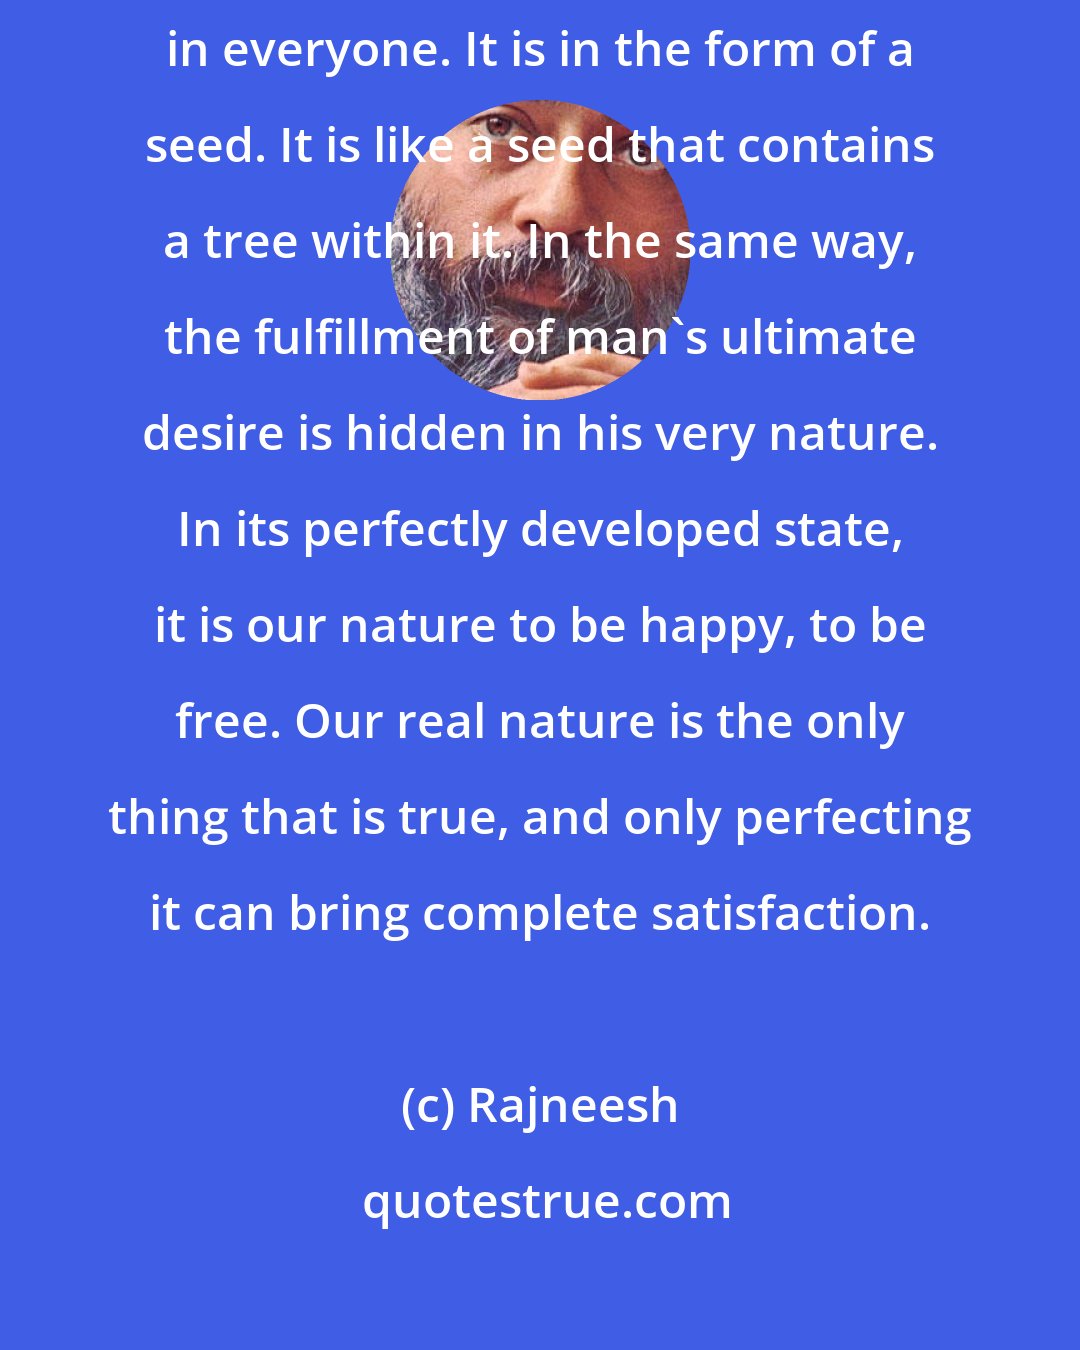 Rajneesh: The desire for total happiness and for ultimate freedom lies dormant in everyone. It is in the form of a seed. It is like a seed that contains a tree within it. In the same way, the fulfillment of man's ultimate desire is hidden in his very nature. In its perfectly developed state, it is our nature to be happy, to be free. Our real nature is the only thing that is true, and only perfecting it can bring complete satisfaction.